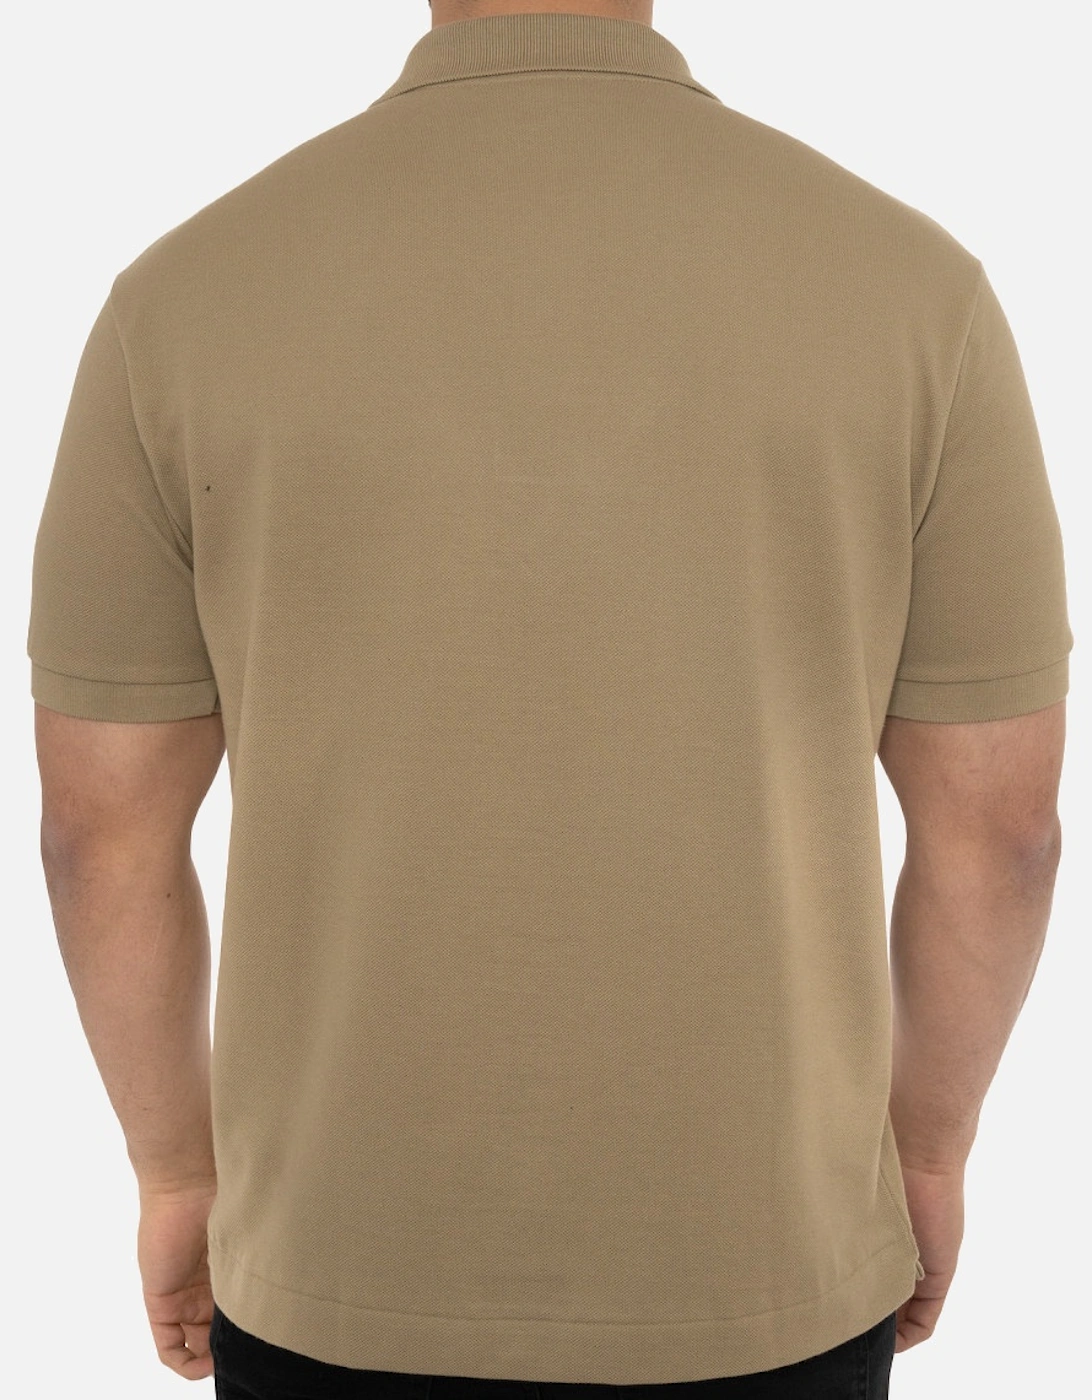 Mens S/S Classic Fit Polo Shirt (Beige)